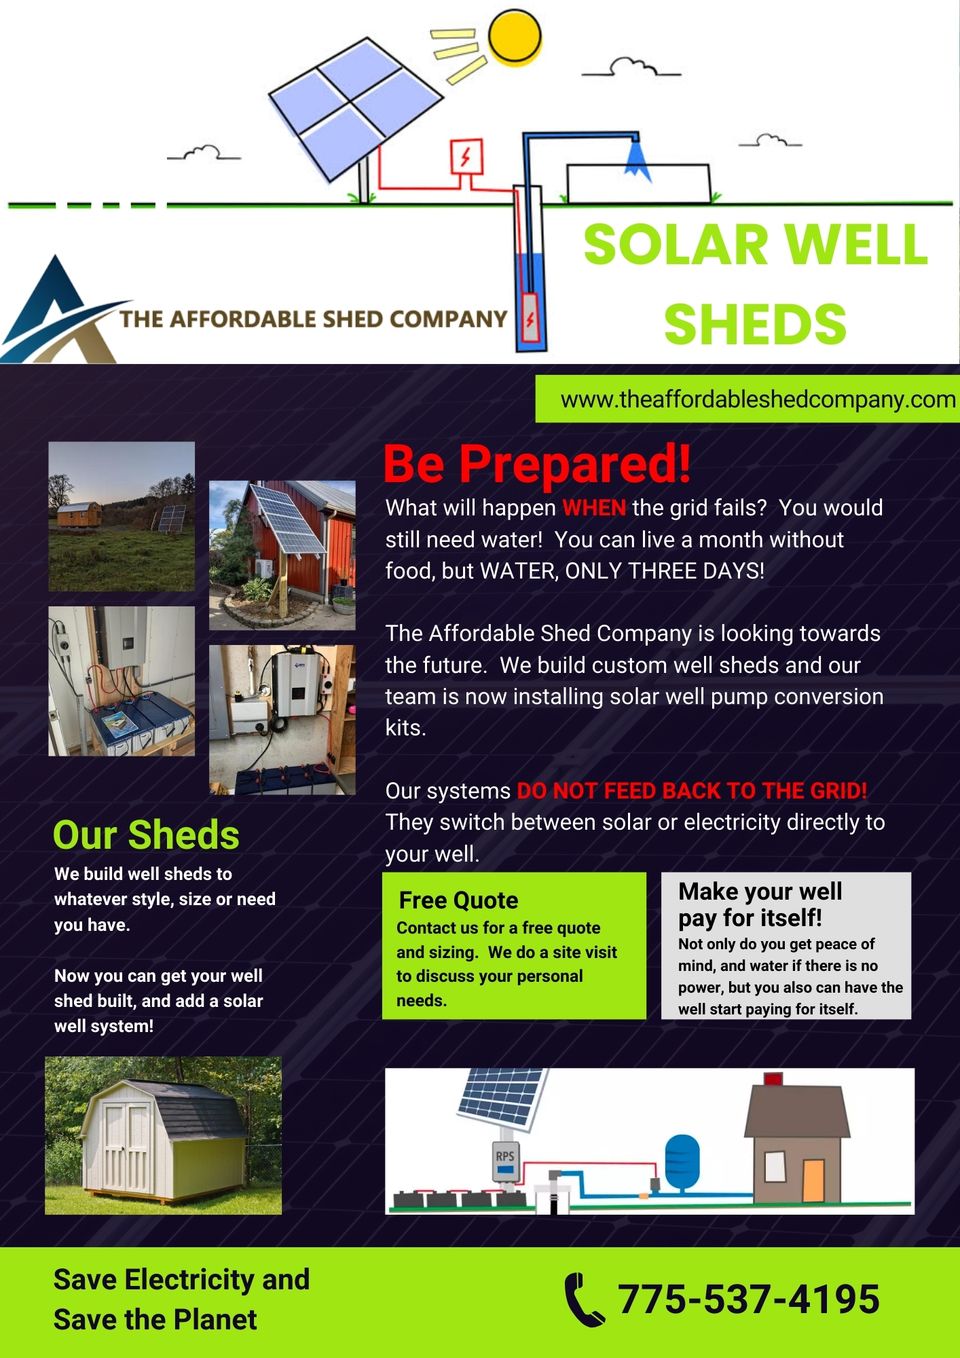 Affordable solar well sheds 